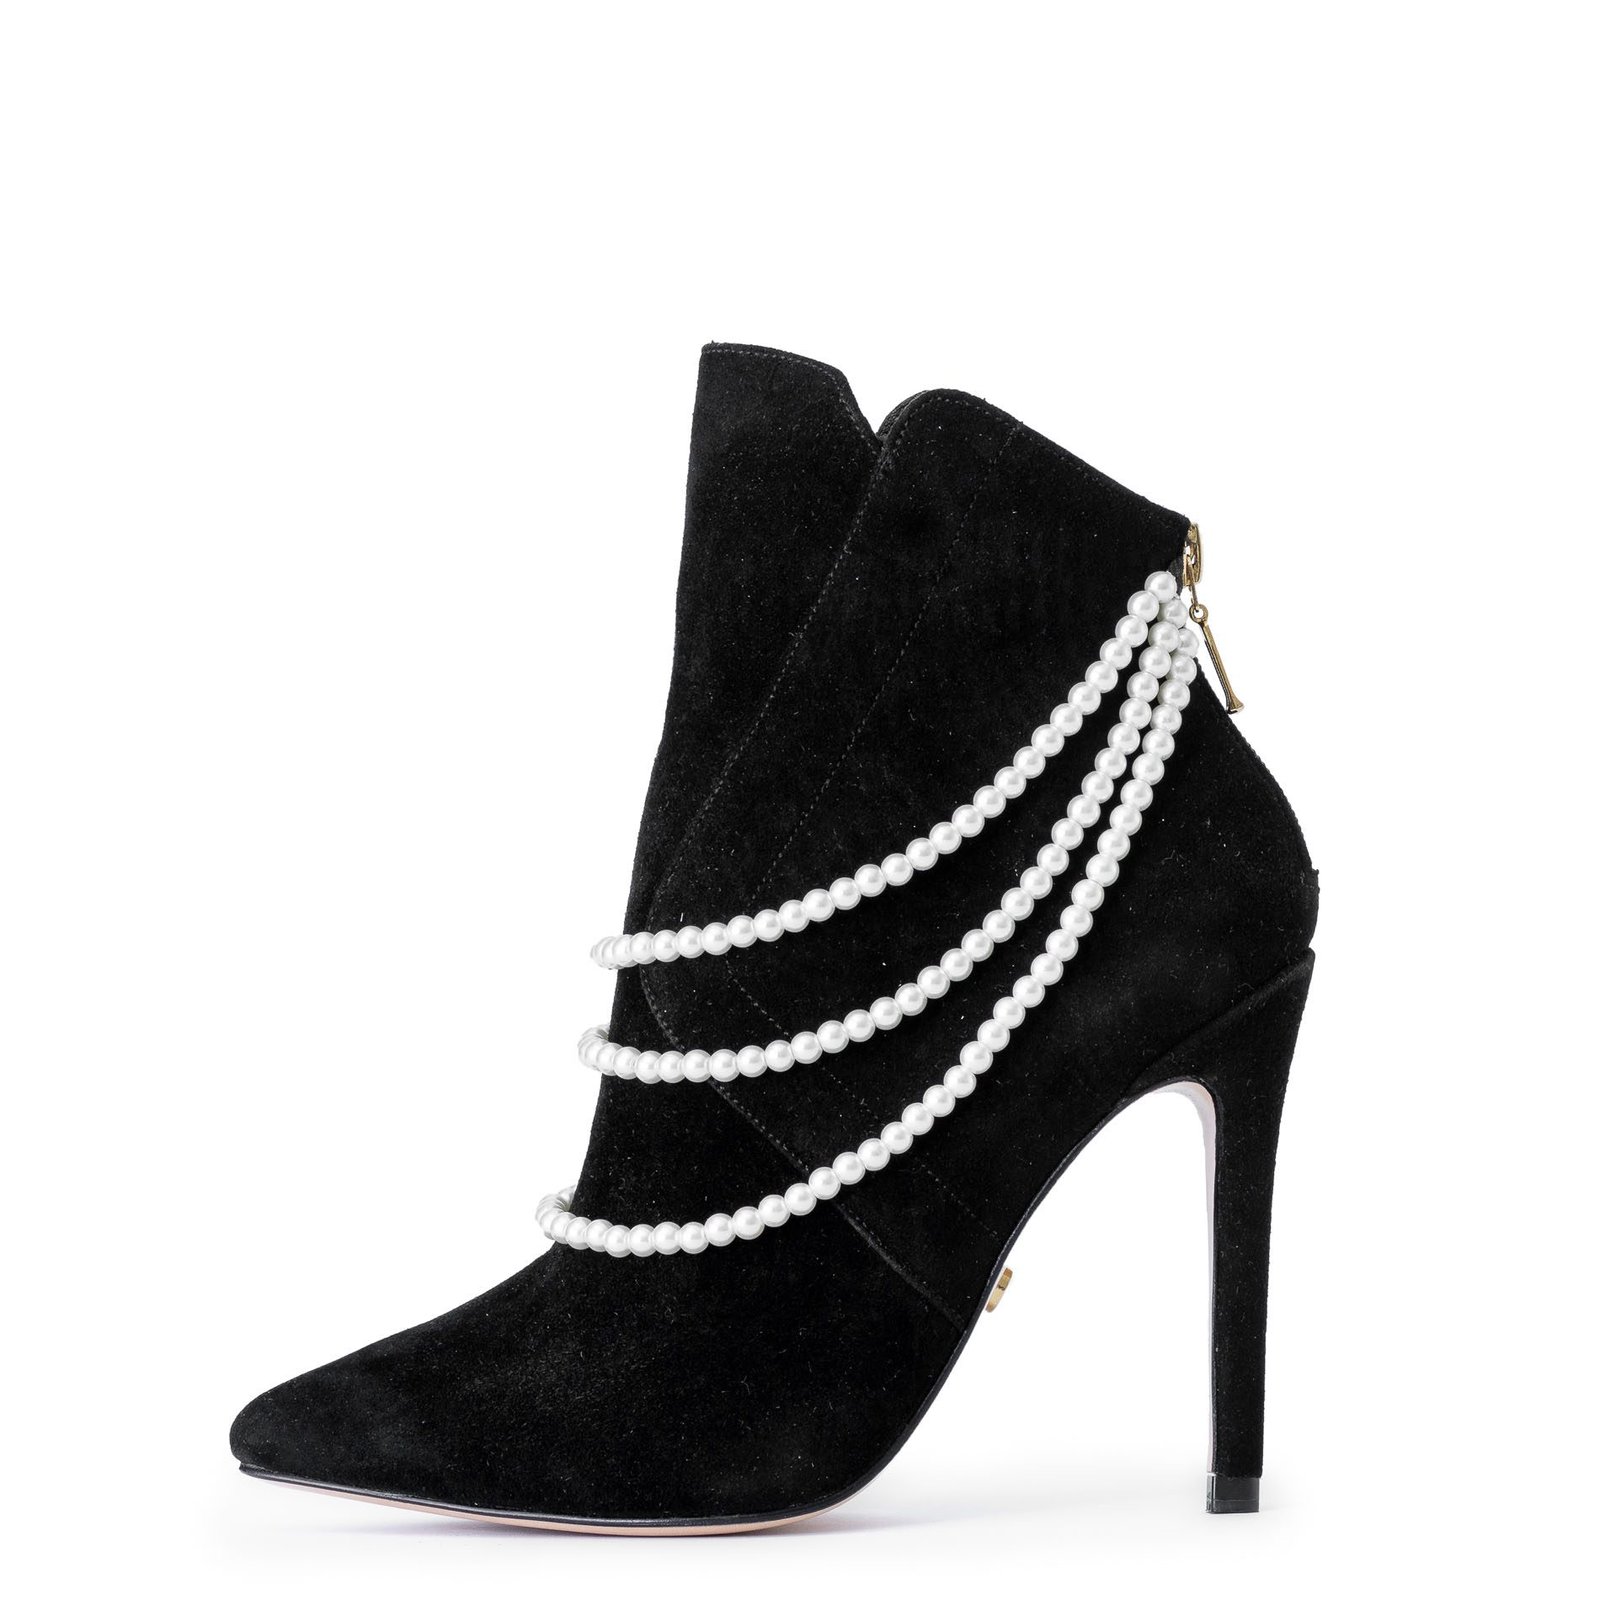 black boots with white pearls